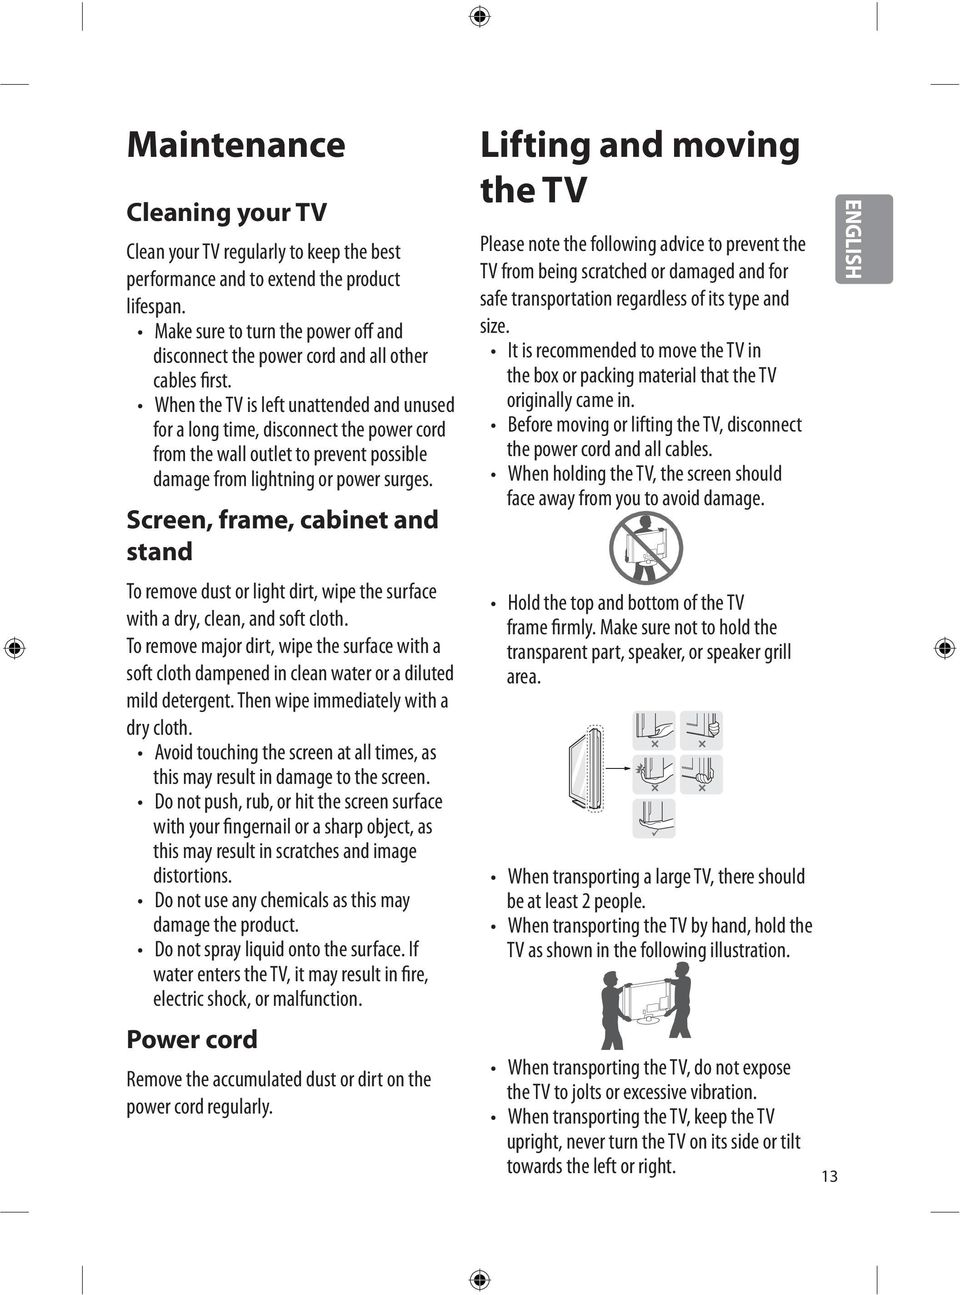 When the TV is left unattended and unused for a long time, disconnect the power cord from the wall outlet to prevent possible damage from lightning or power surges.